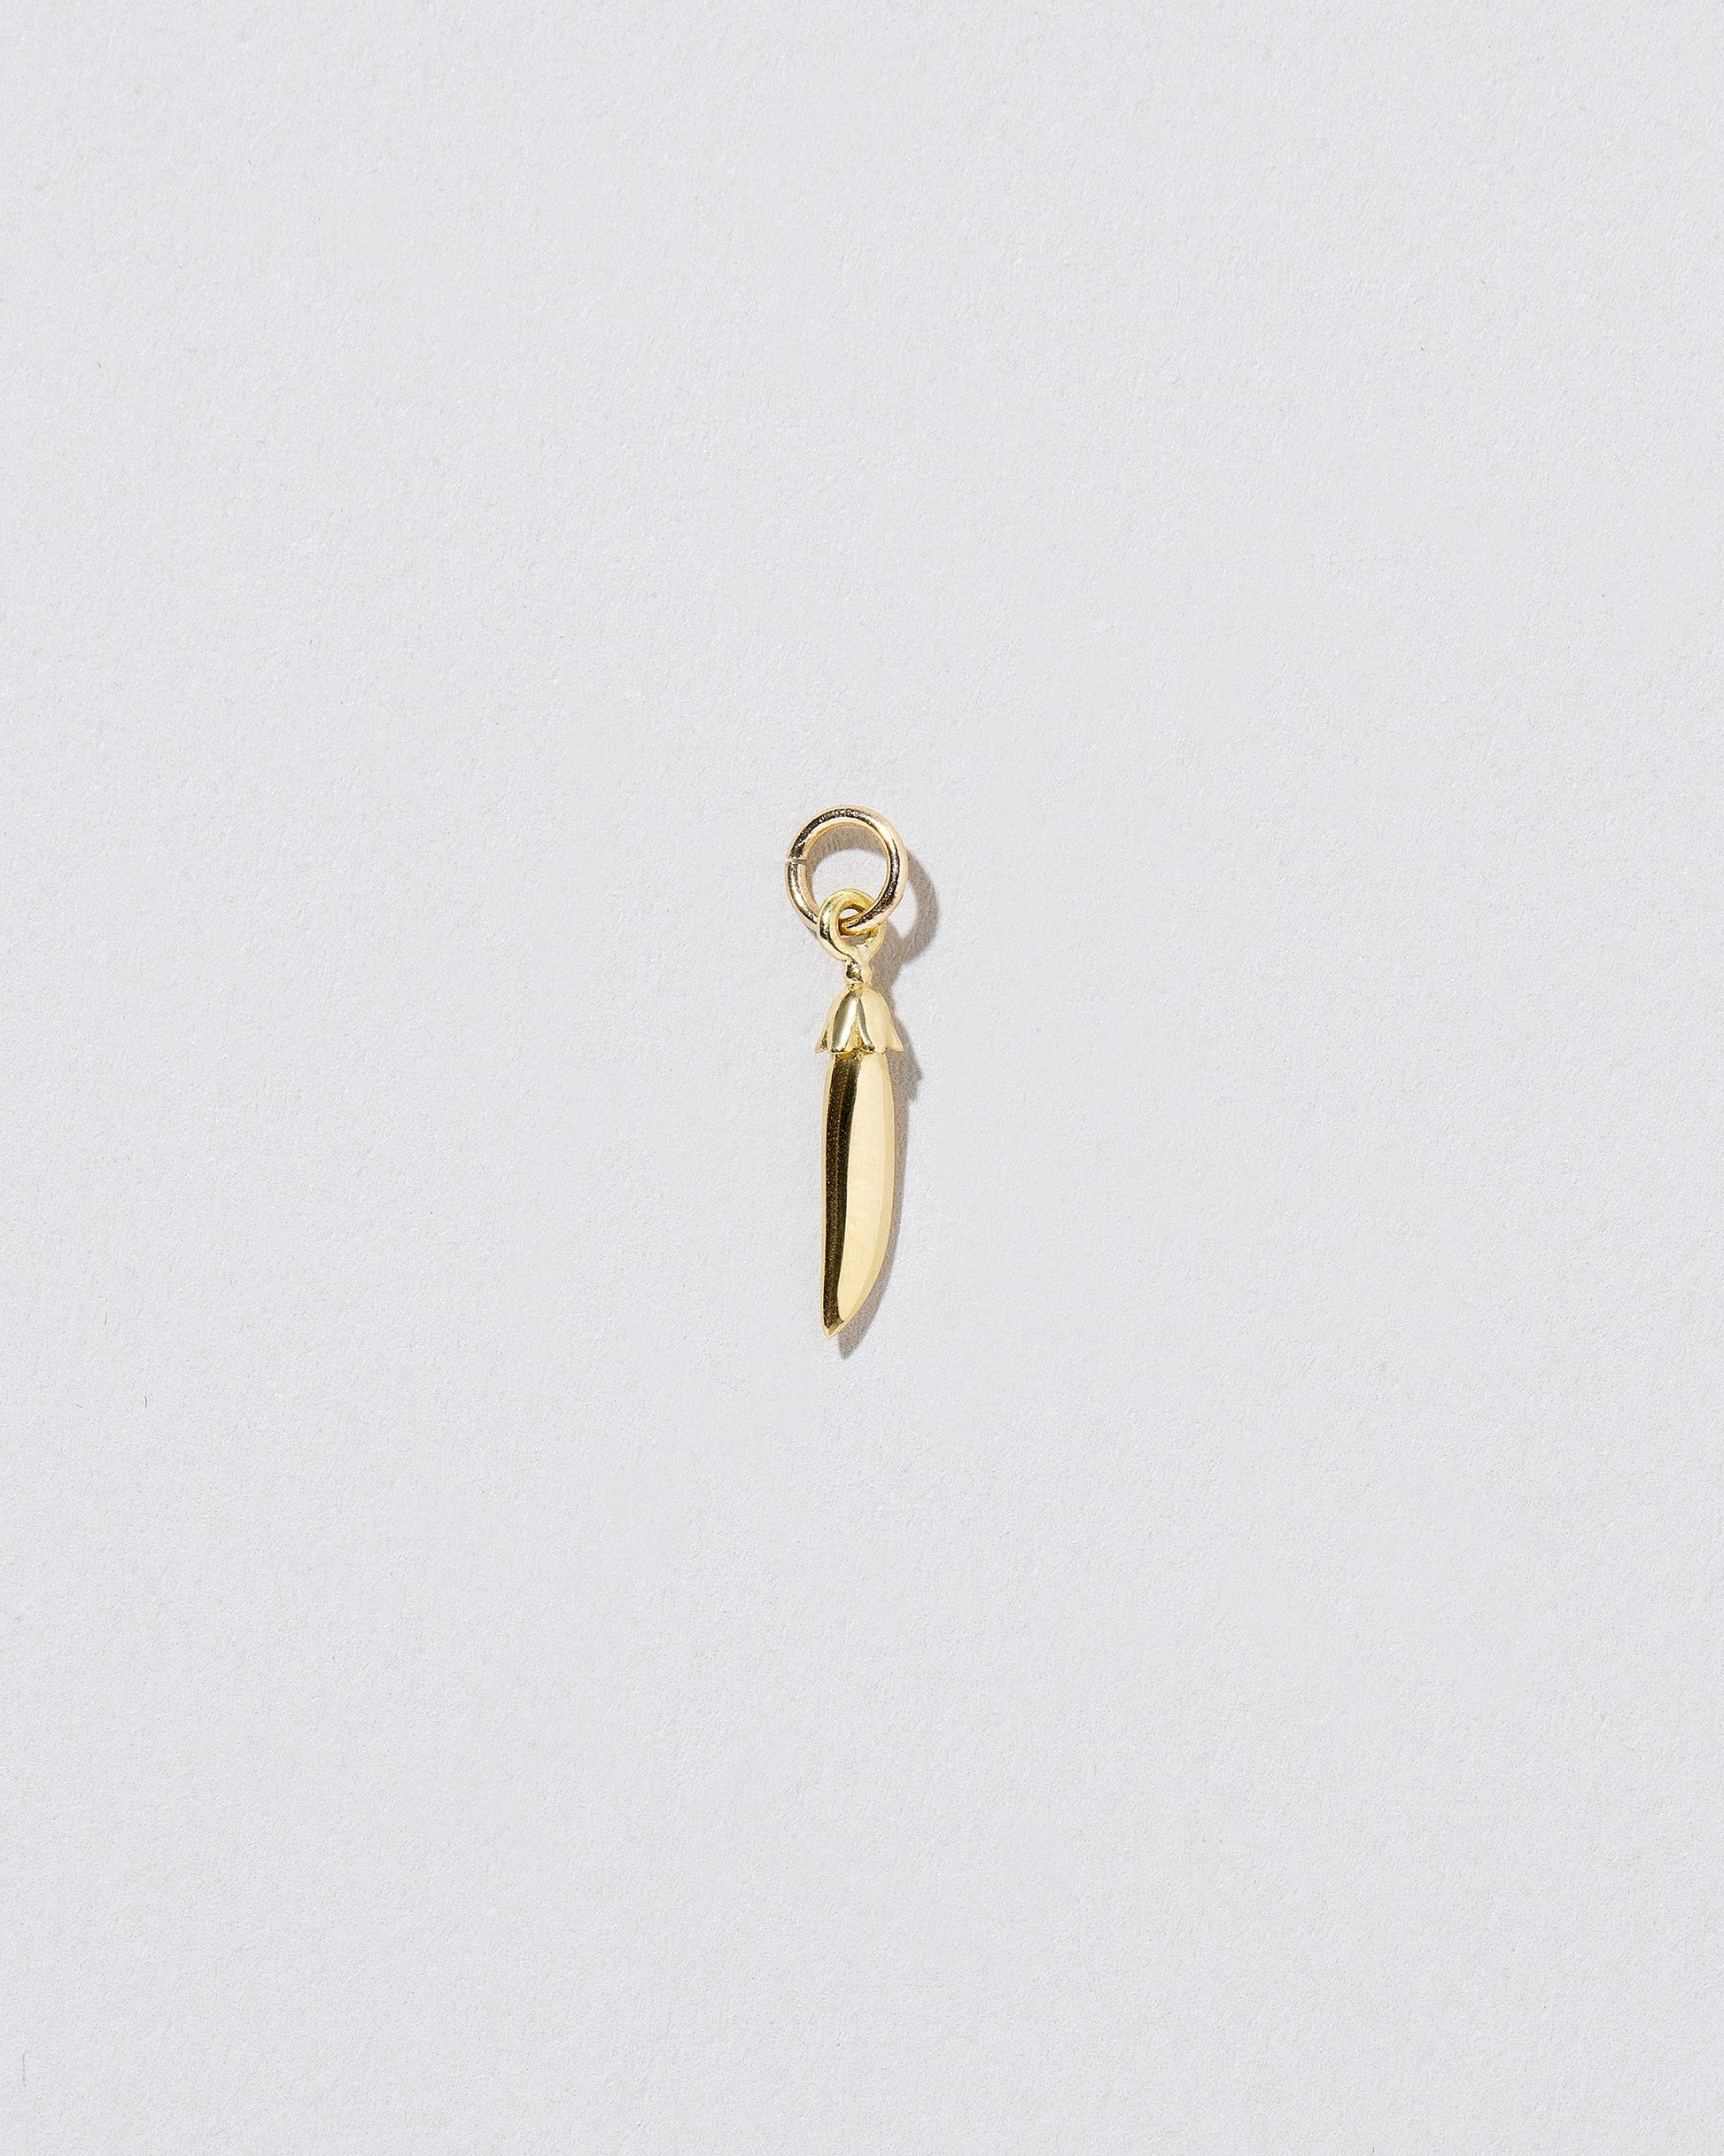 Snap Pea Charm on light colored background.